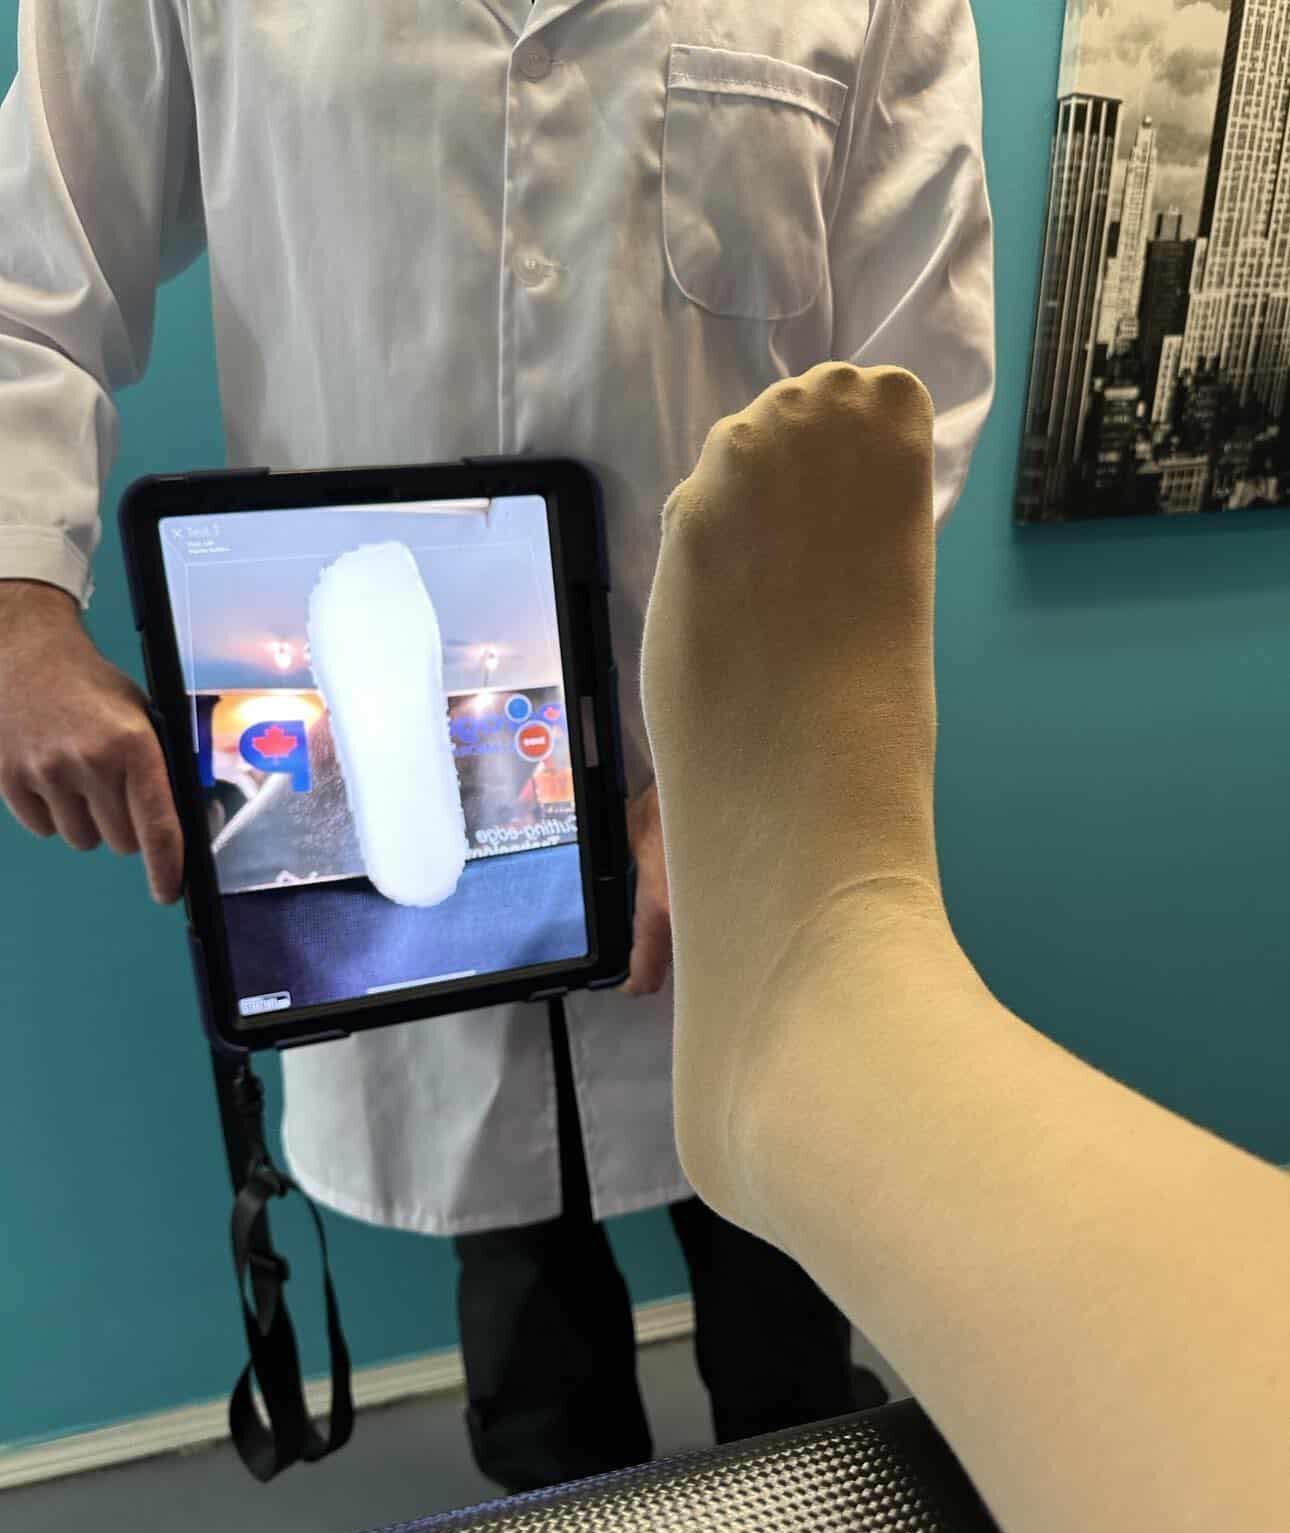 Scanning a foot with an ipad